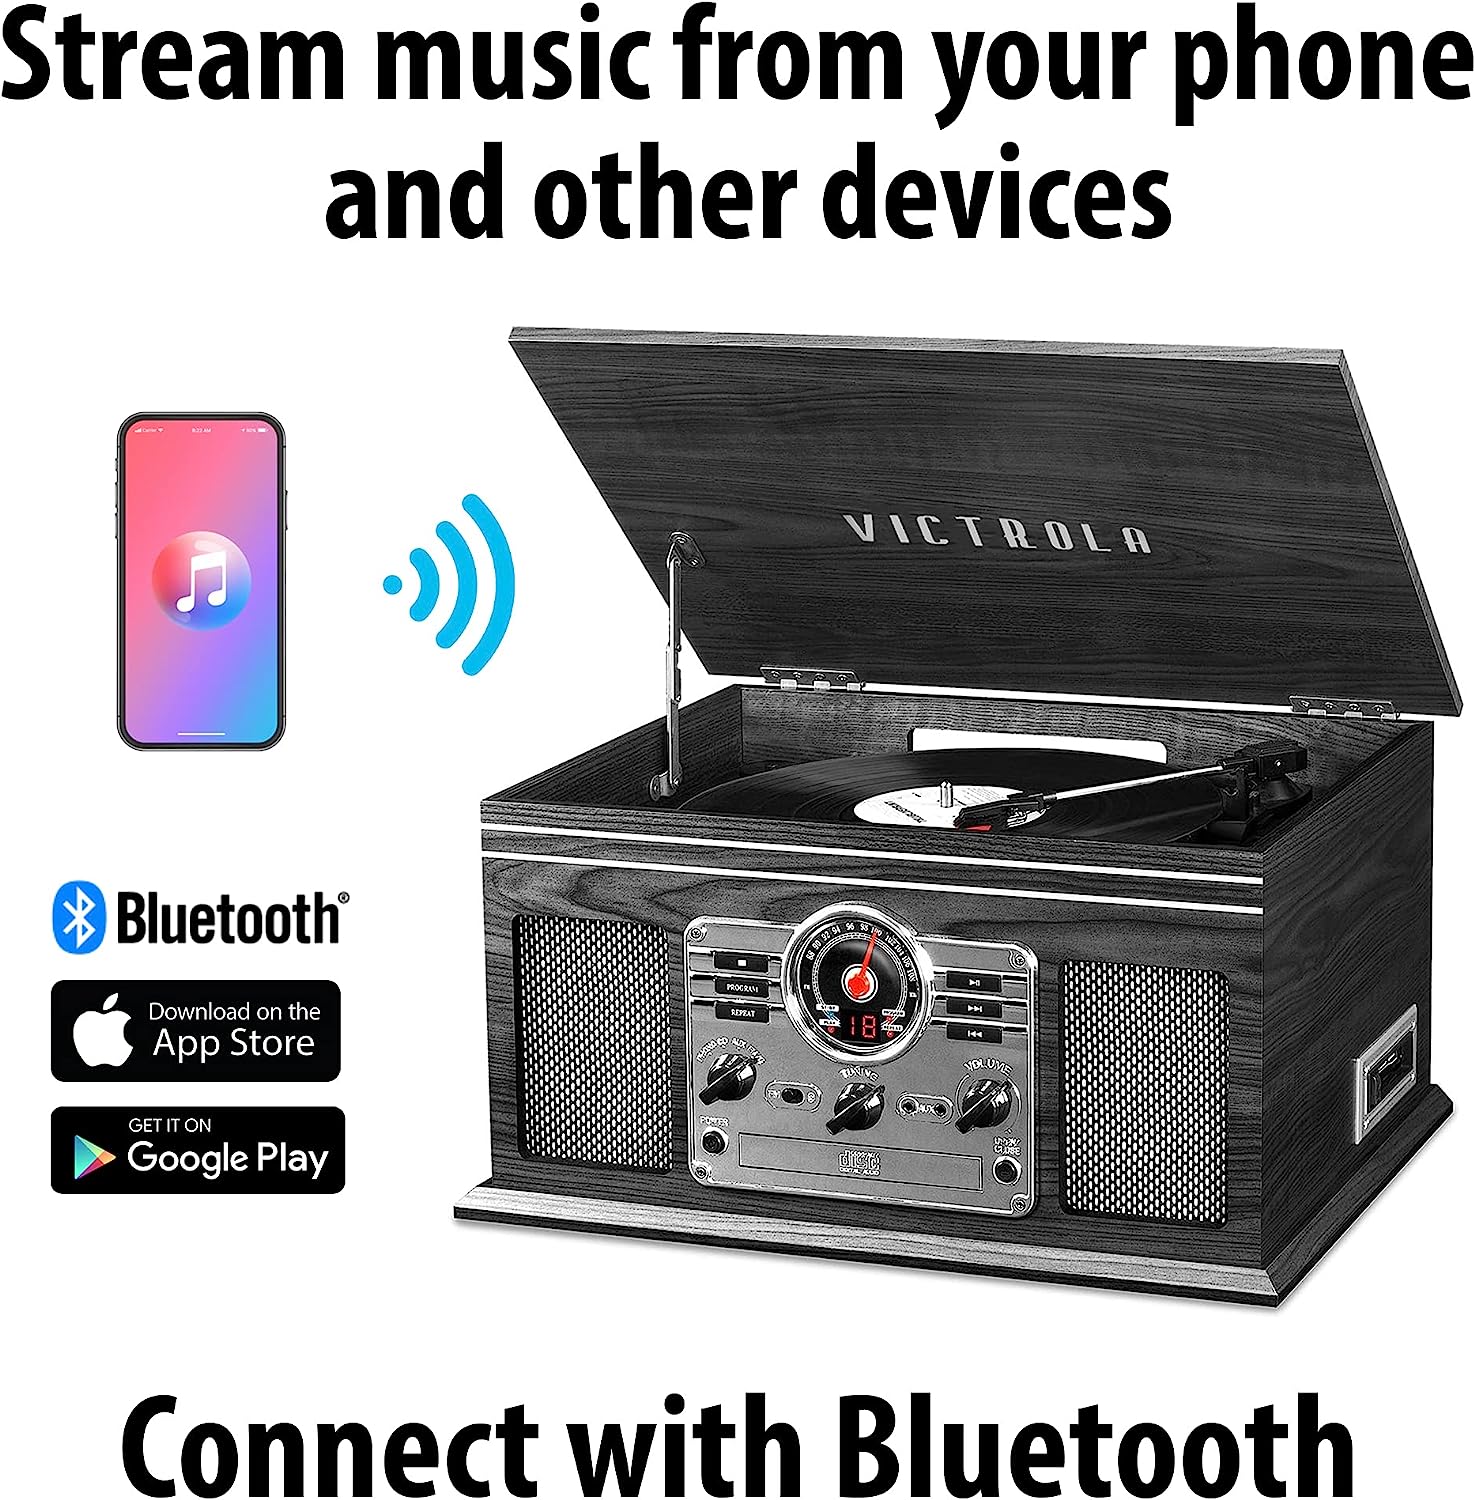 Victrola Nostalgic 6-in-1 Bluetooth Record Player & Multimedia Center with Built-in Speakers - 3-Speed Turntable, CD & Cassette Player, FM Radio | Wireless Music Streaming | Mahogany